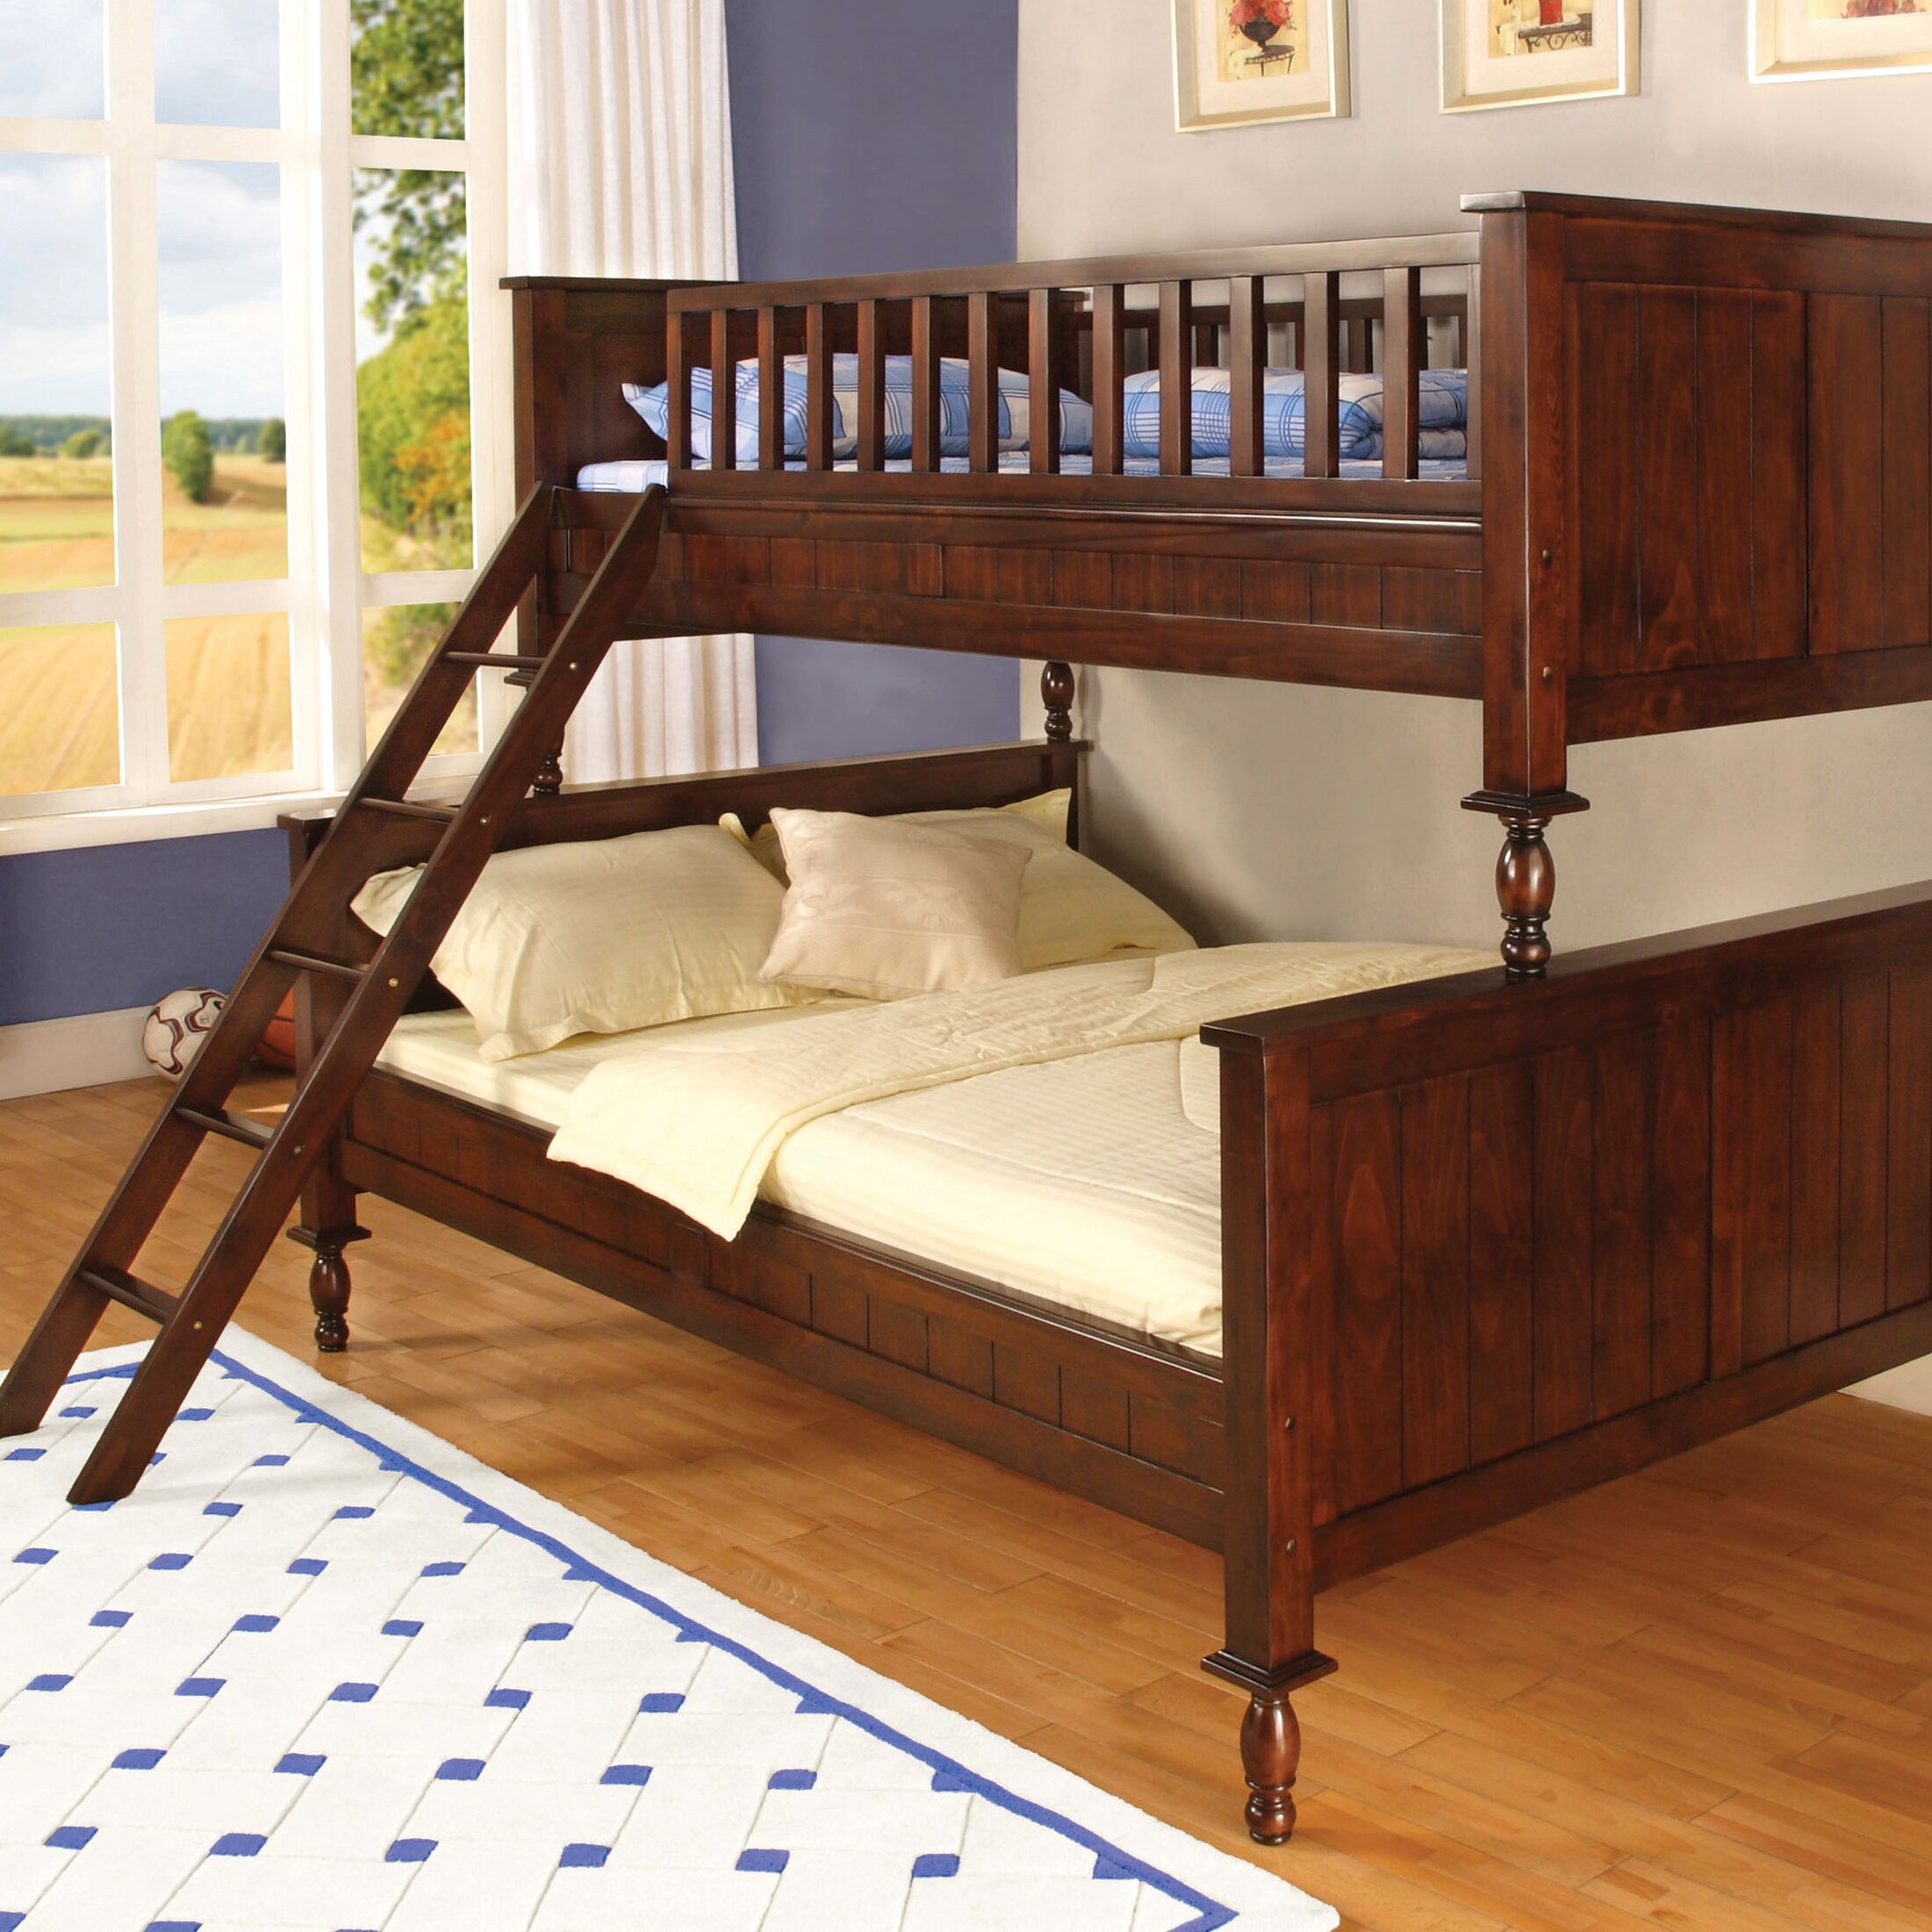 Full Over Futon Bunk Bed Visualhunt, Twin Over Full Futon Bunk Bed Wood